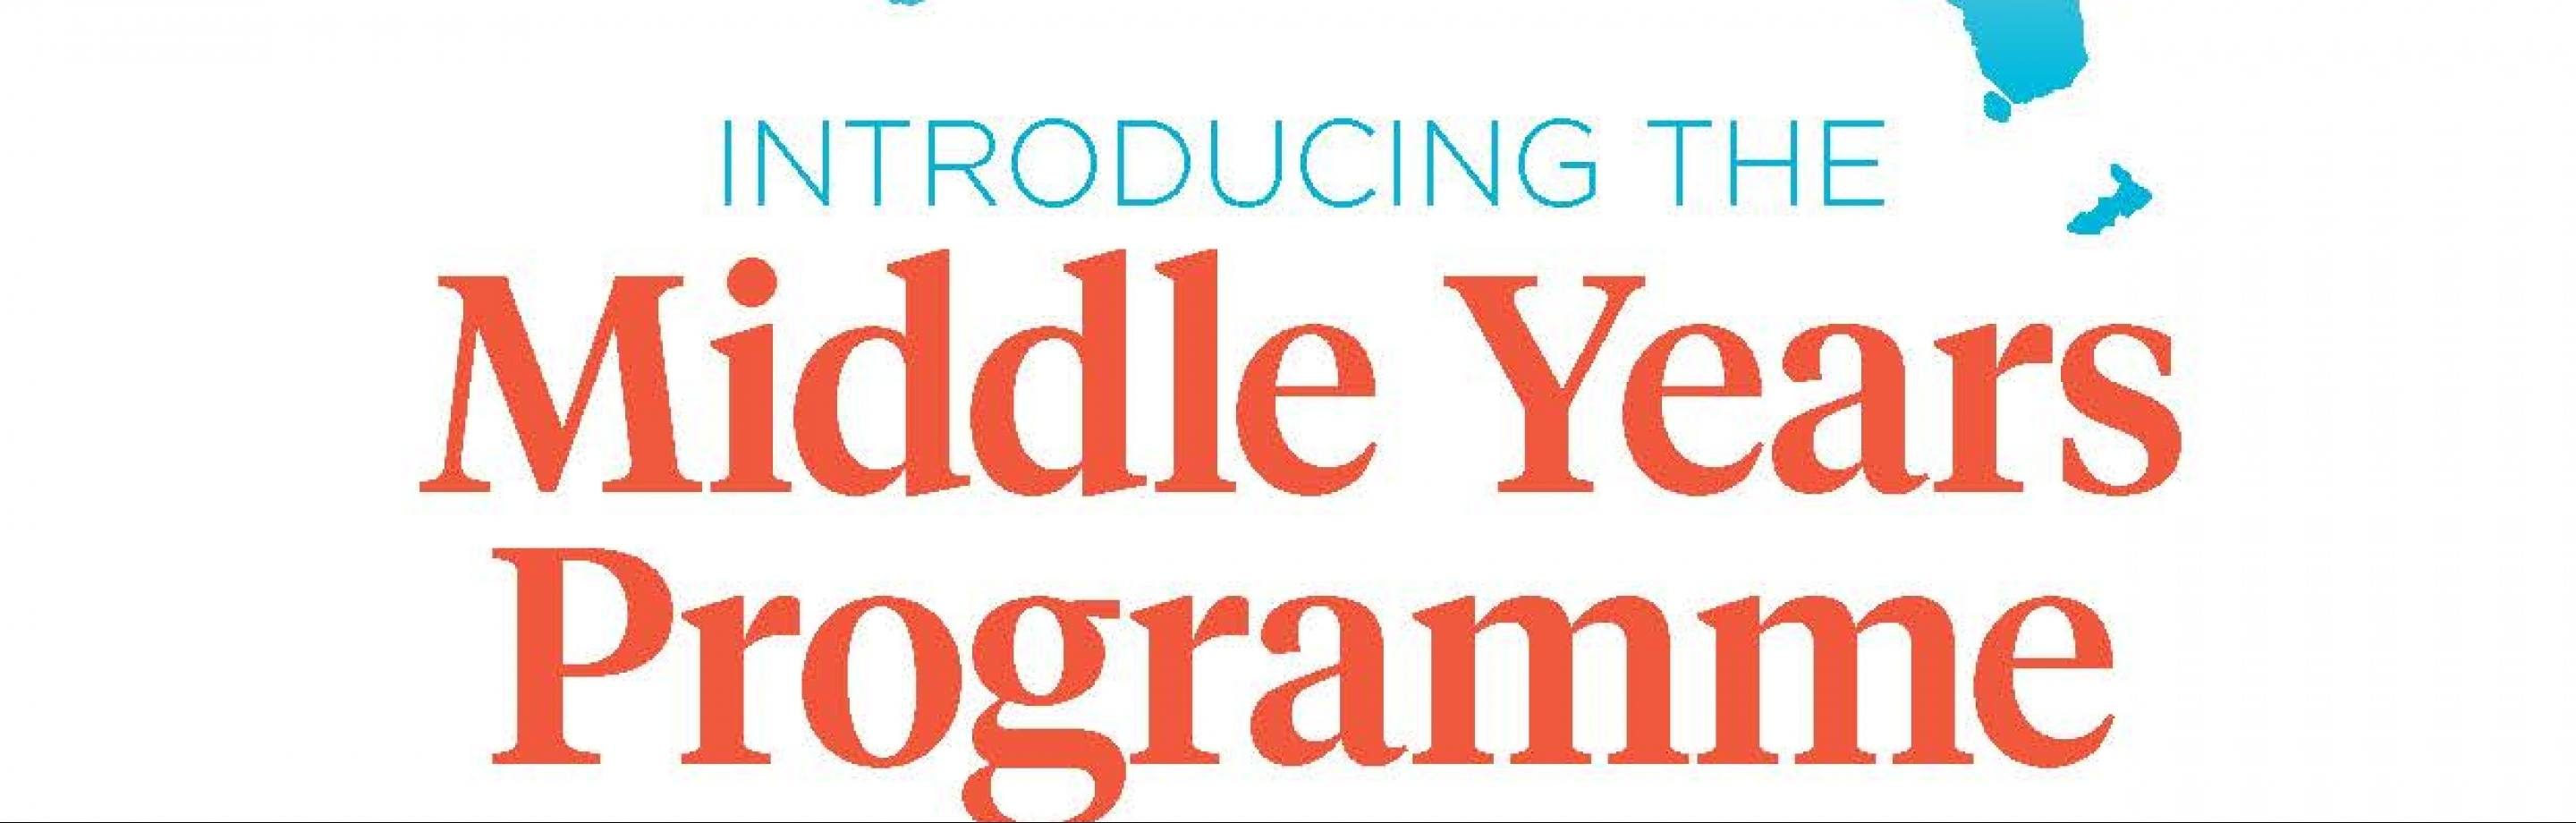 Introducing the Middle Years Programme